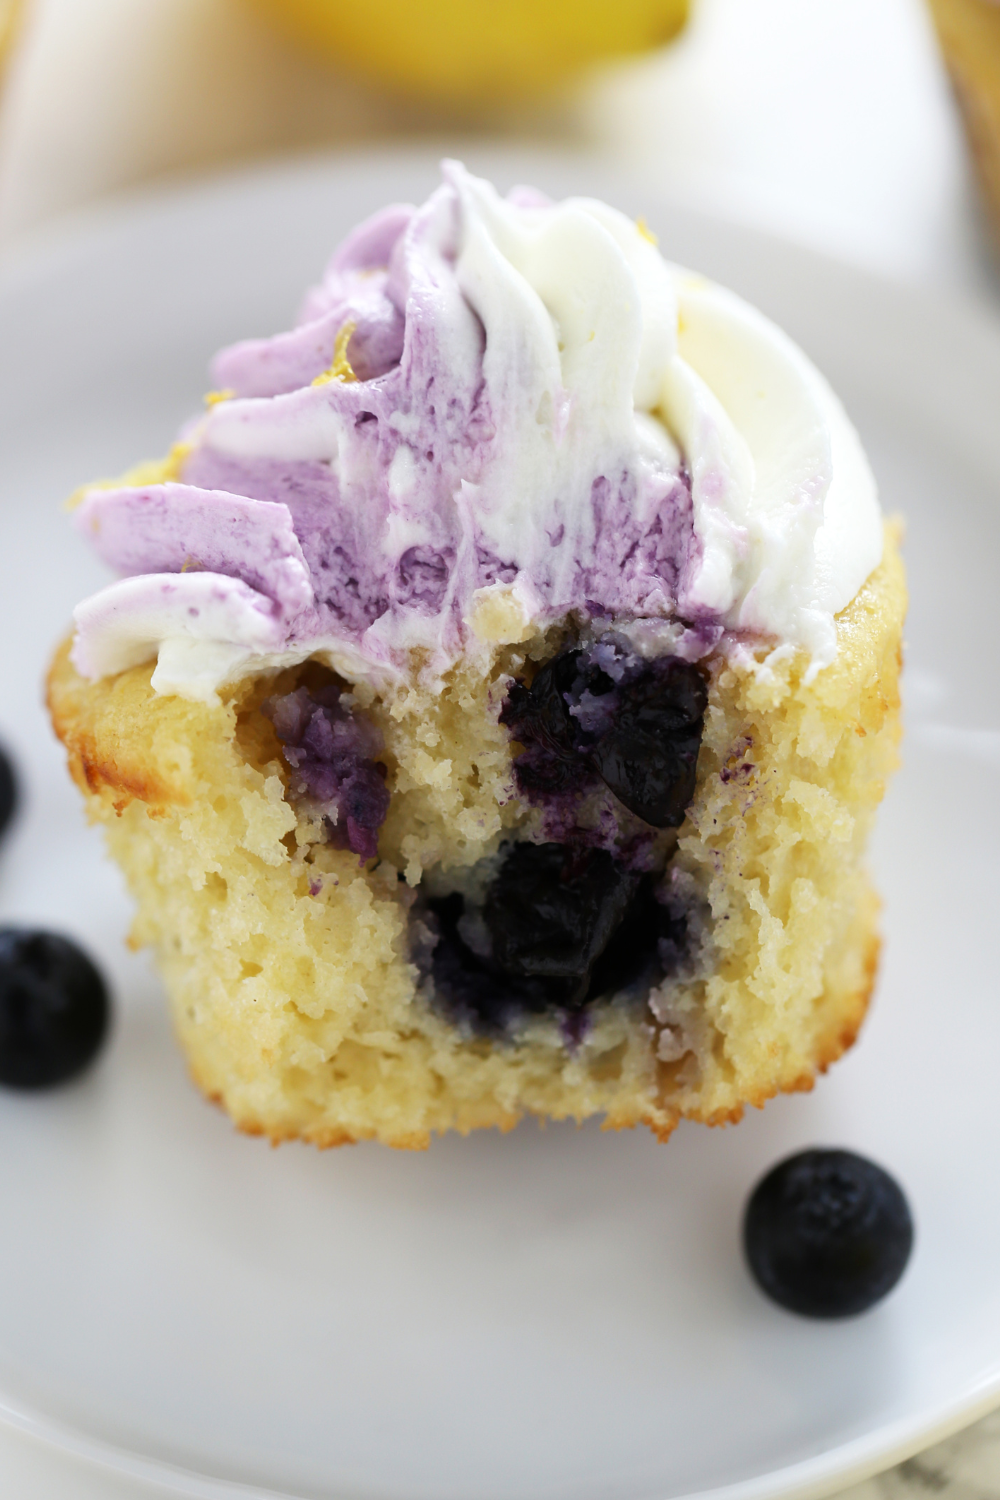 a cupcake bitten in half, so you can see the blueberries inside.